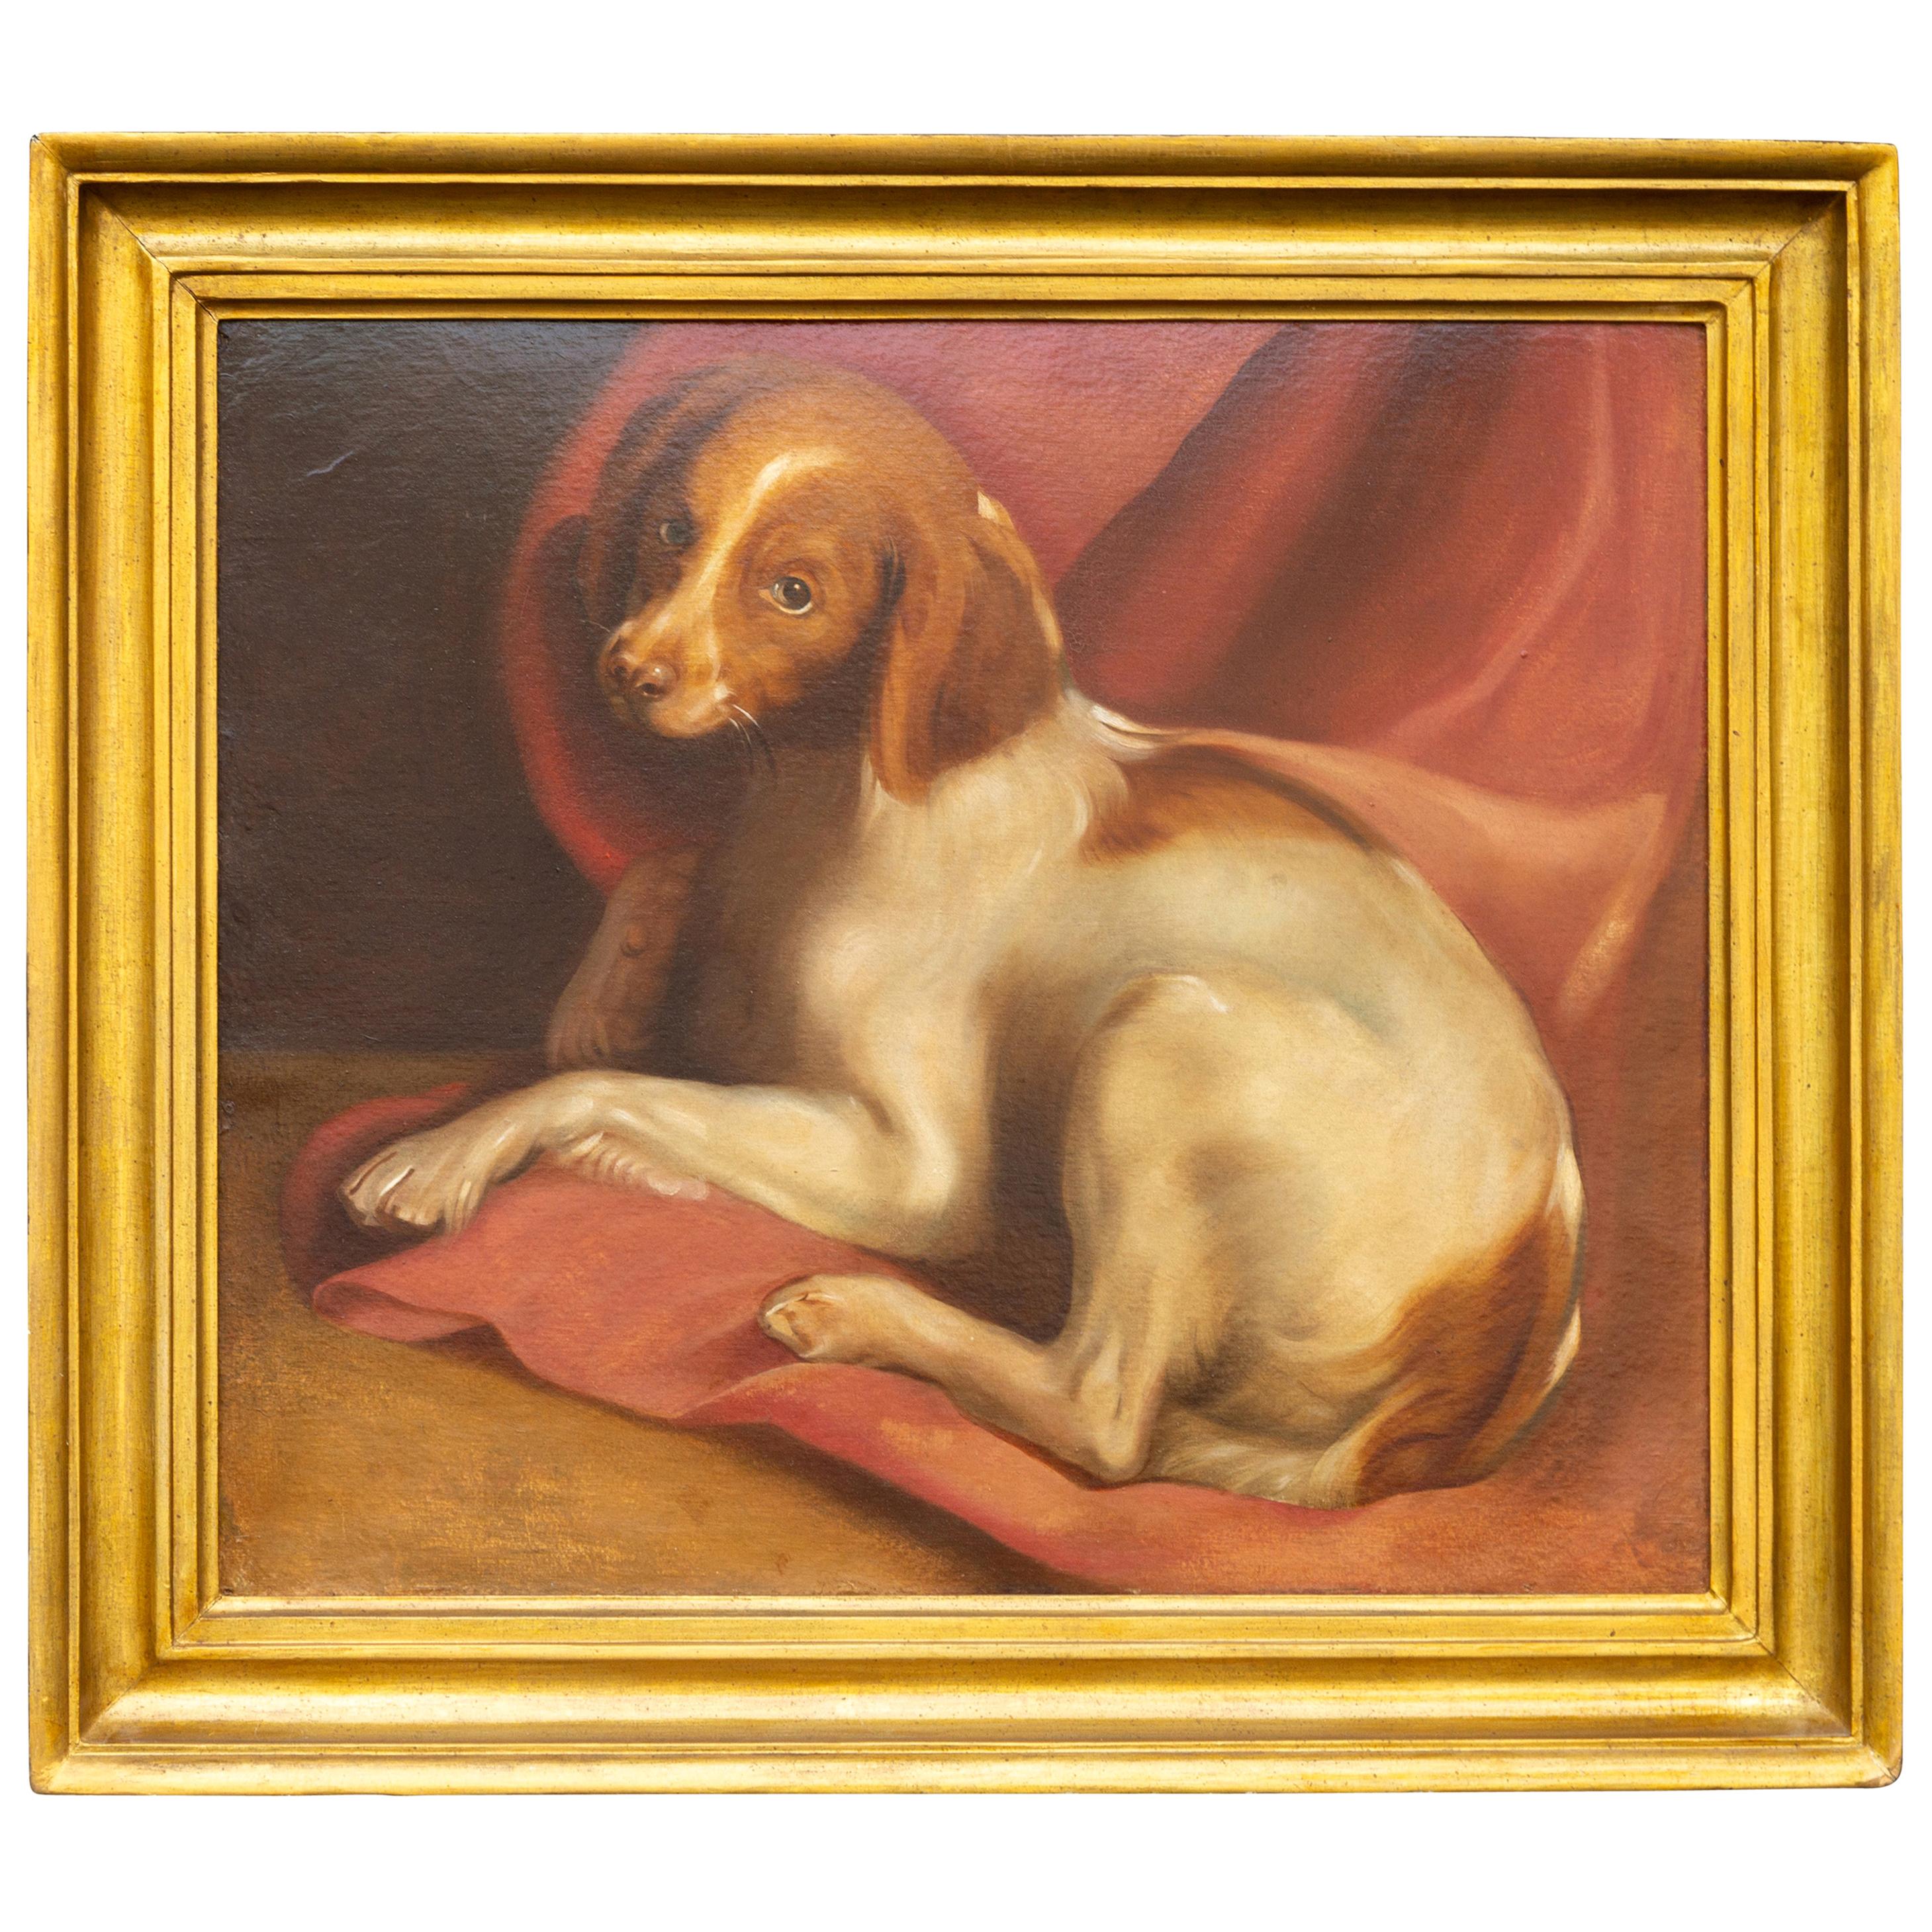 American 1890s Framed Oil on Board Painting Depicting a Dog Lying on a Red Drape